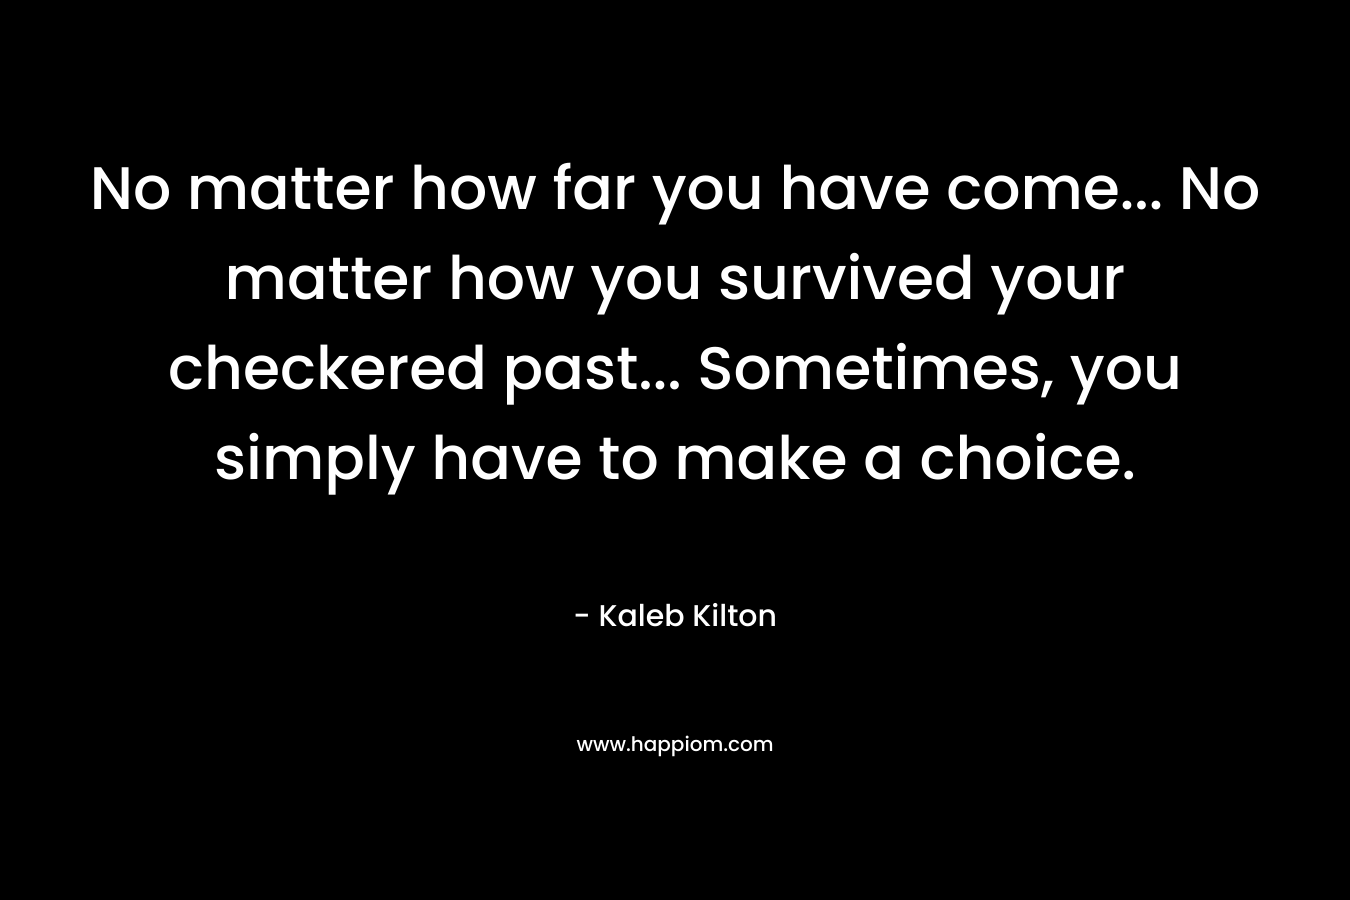 No matter how far you have come… No matter how you survived your checkered past… Sometimes, you simply have to make a choice. – Kaleb Kilton